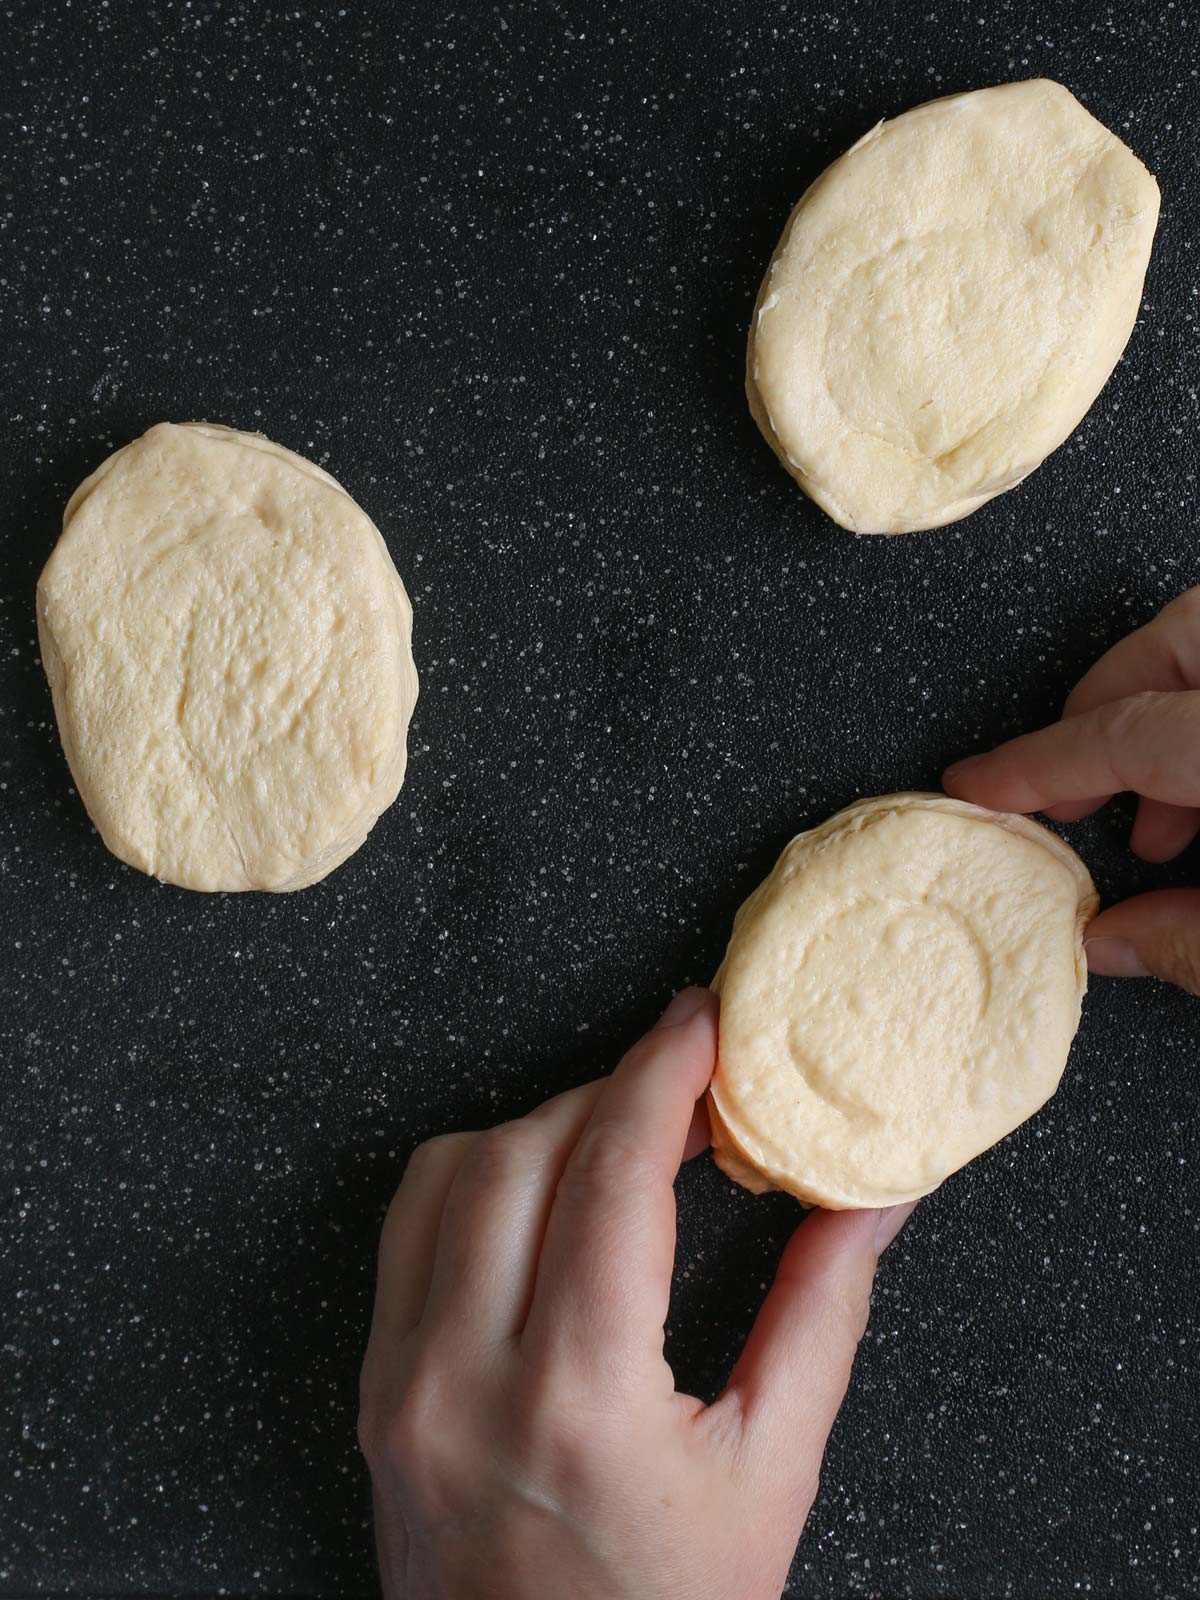 reshaping biscuits into oval egg shapes.